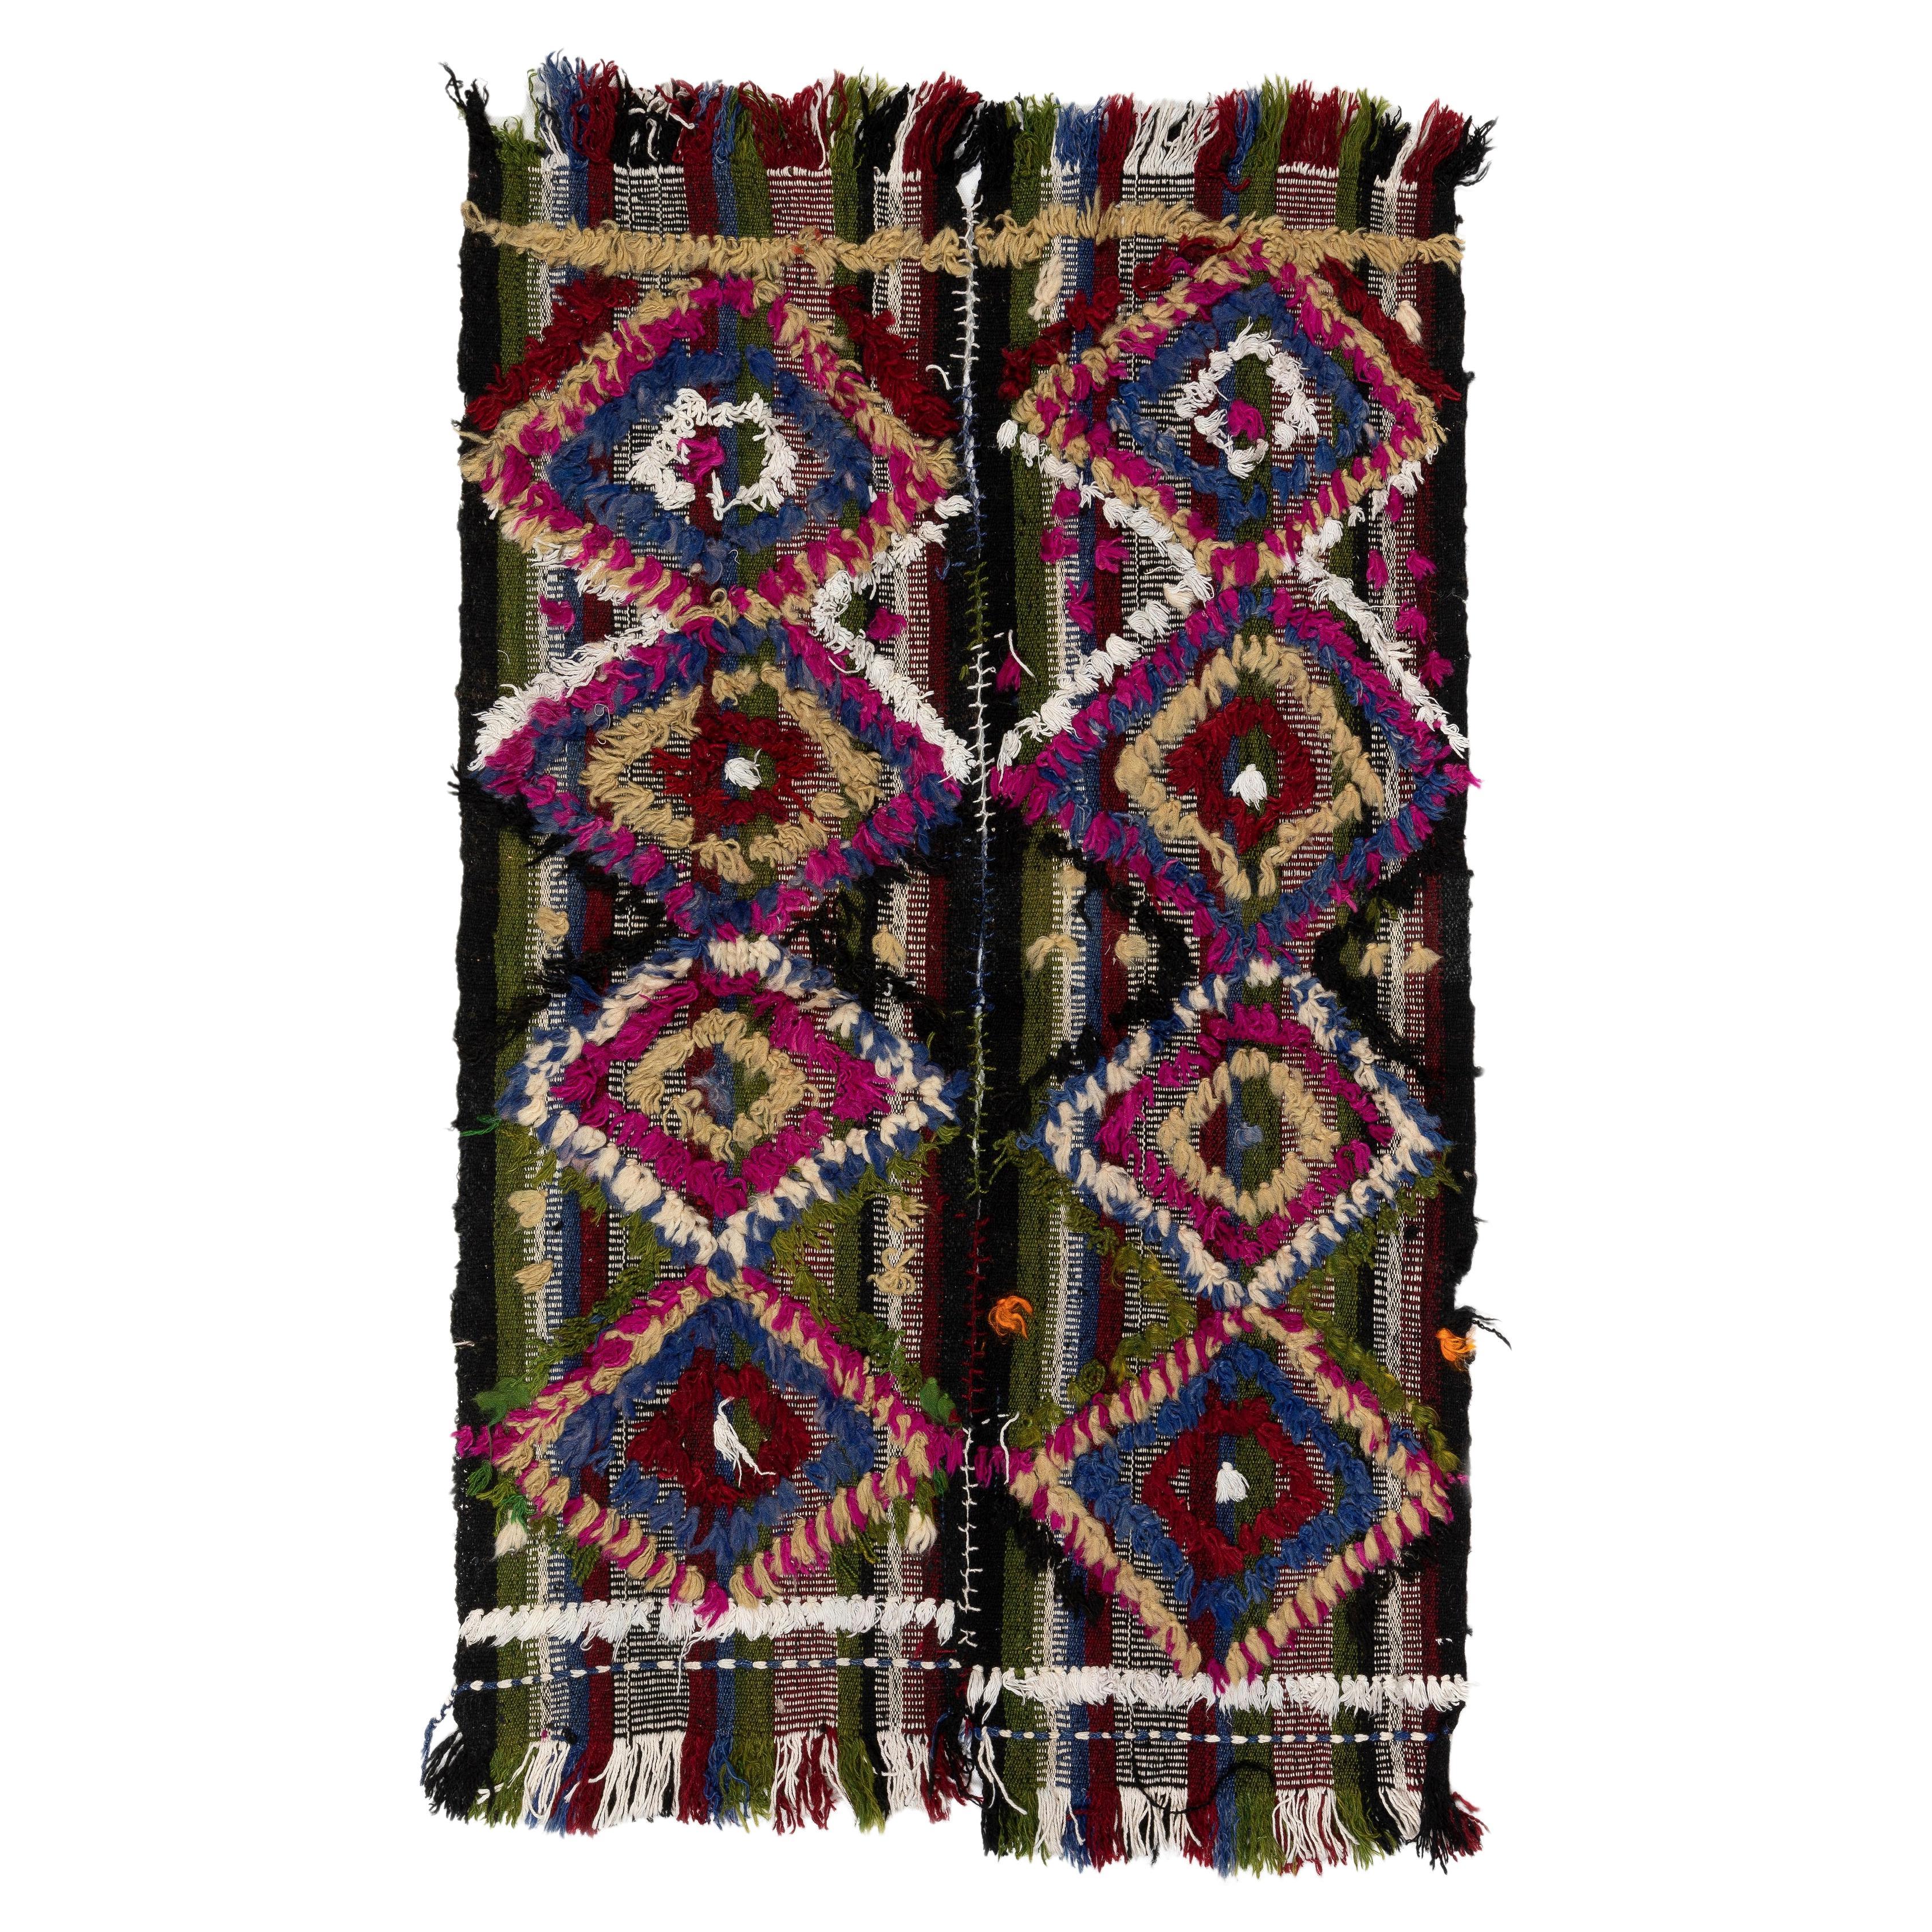 3x3.8 Ft Hand-Made Anatolian Kilim Rug with Colorful Poms, Great for Kids Room For Sale